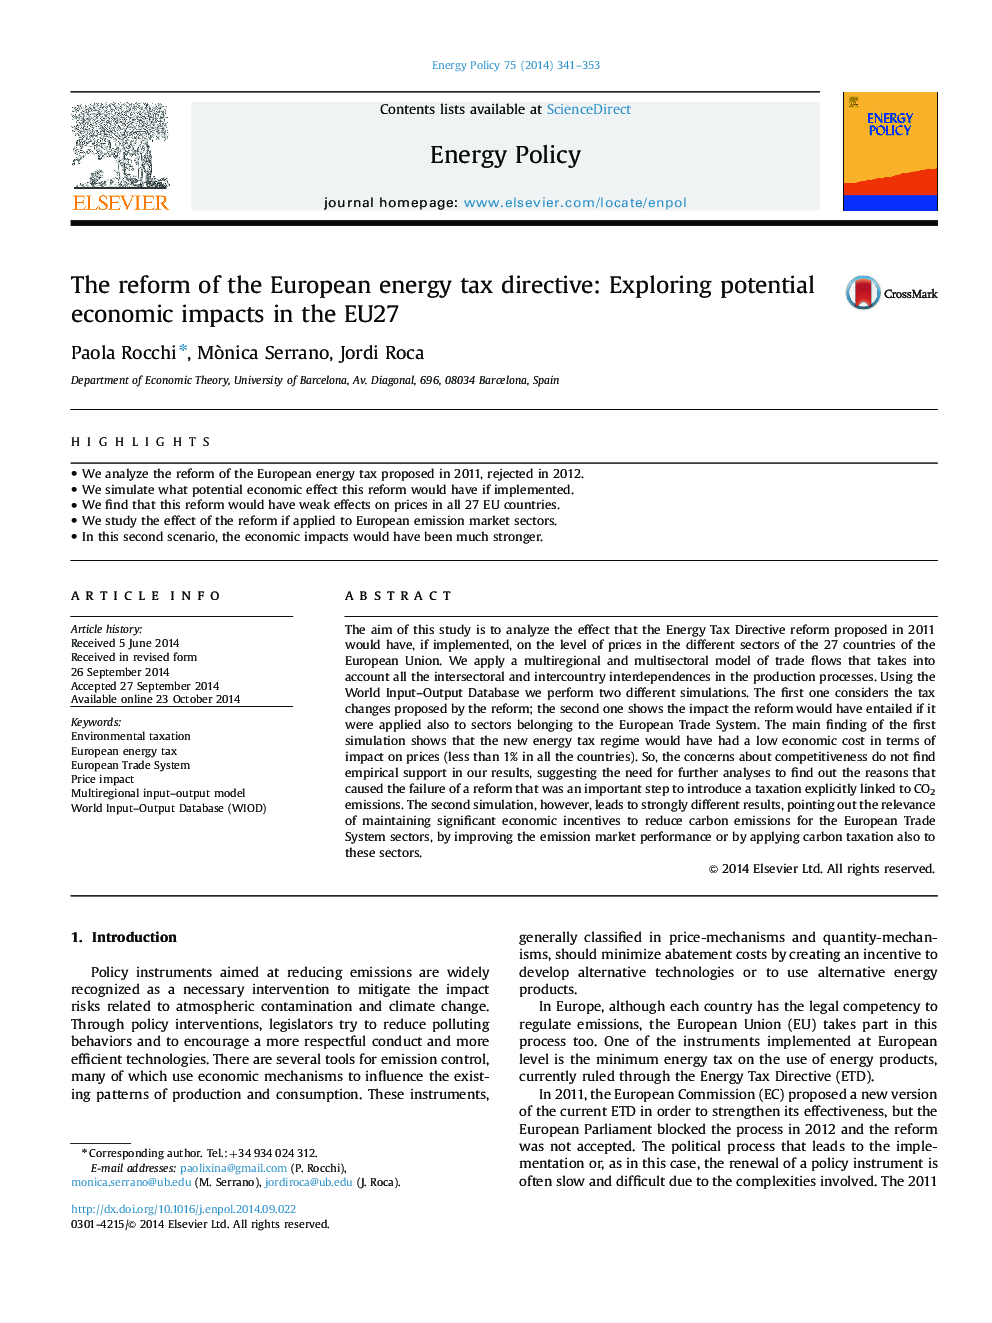 The reform of the European energy tax directive: Exploring potential economic impacts in the EU27